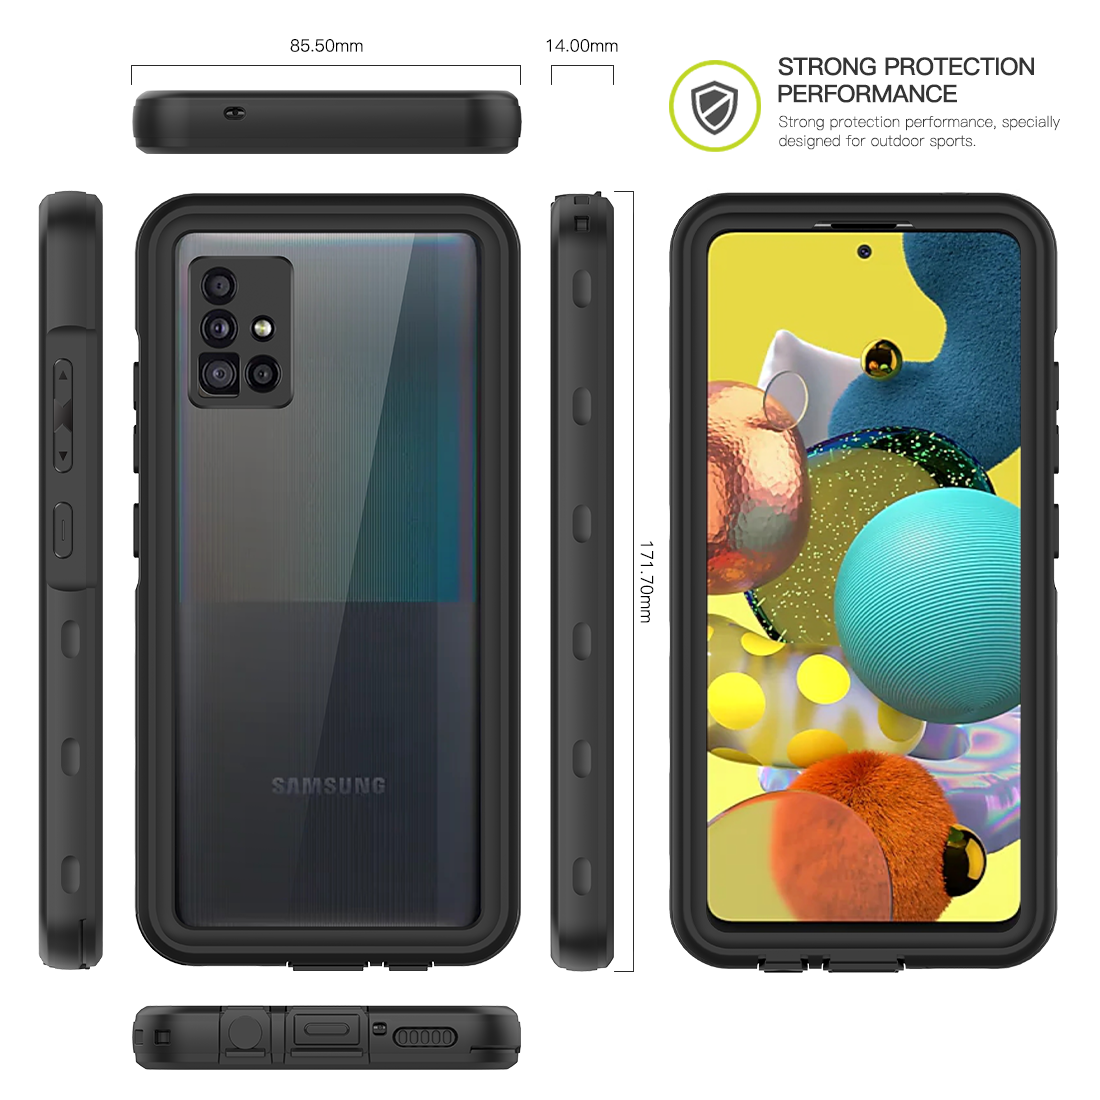 Samsung Galaxy A51 Case Waterproof IP68 Clear Full Protection Built-in Screen Protector